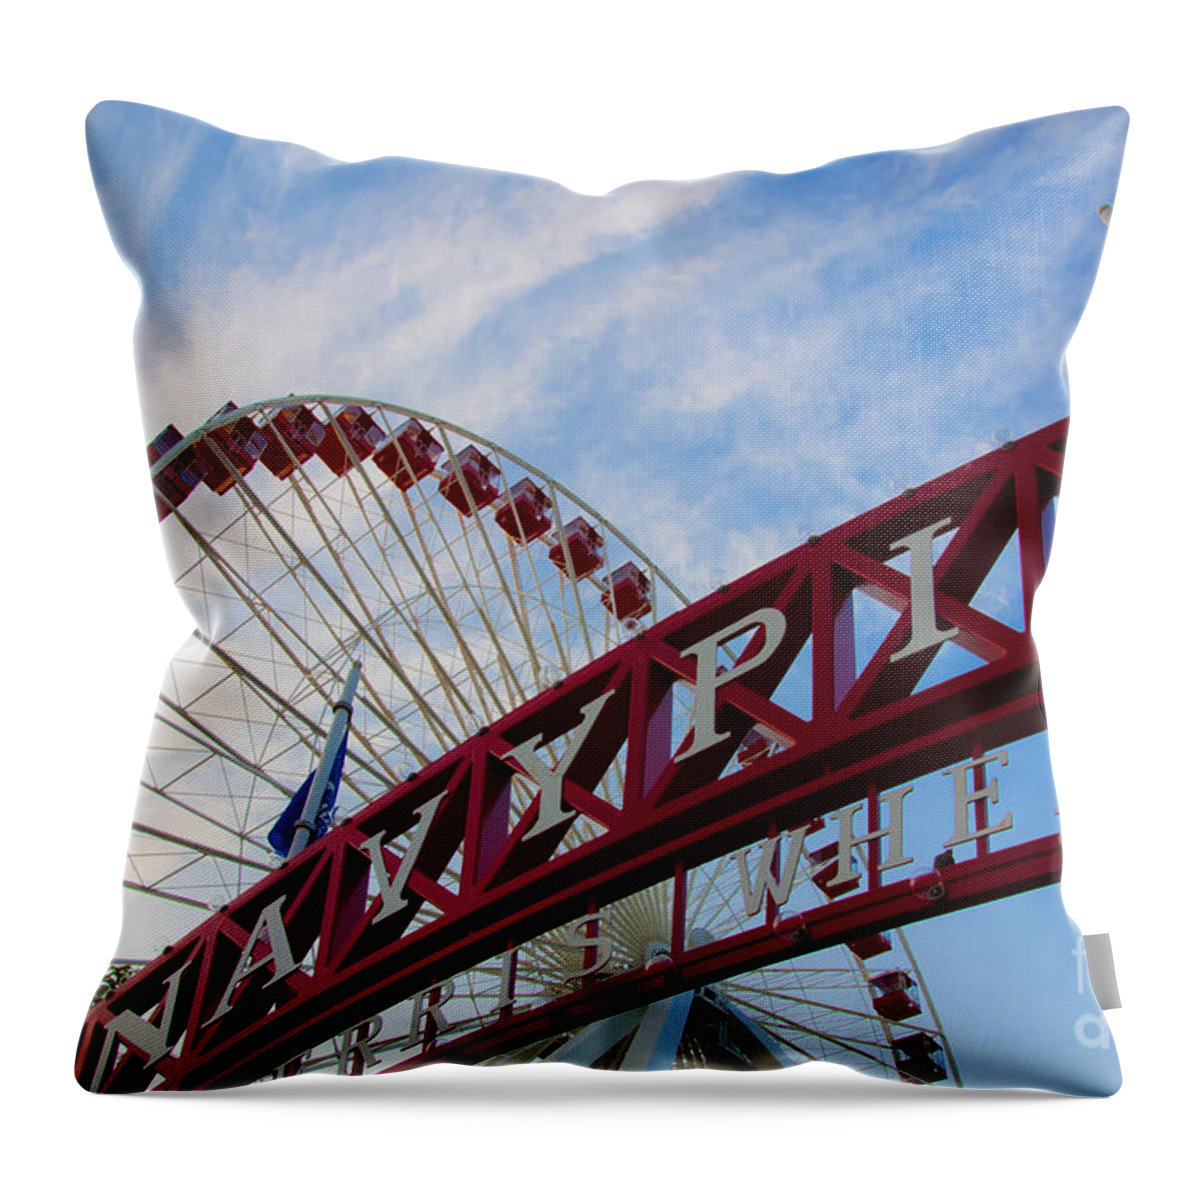 Navy Pier Throw Pillow featuring the photograph Navy Pier by Dejan Jovanovic